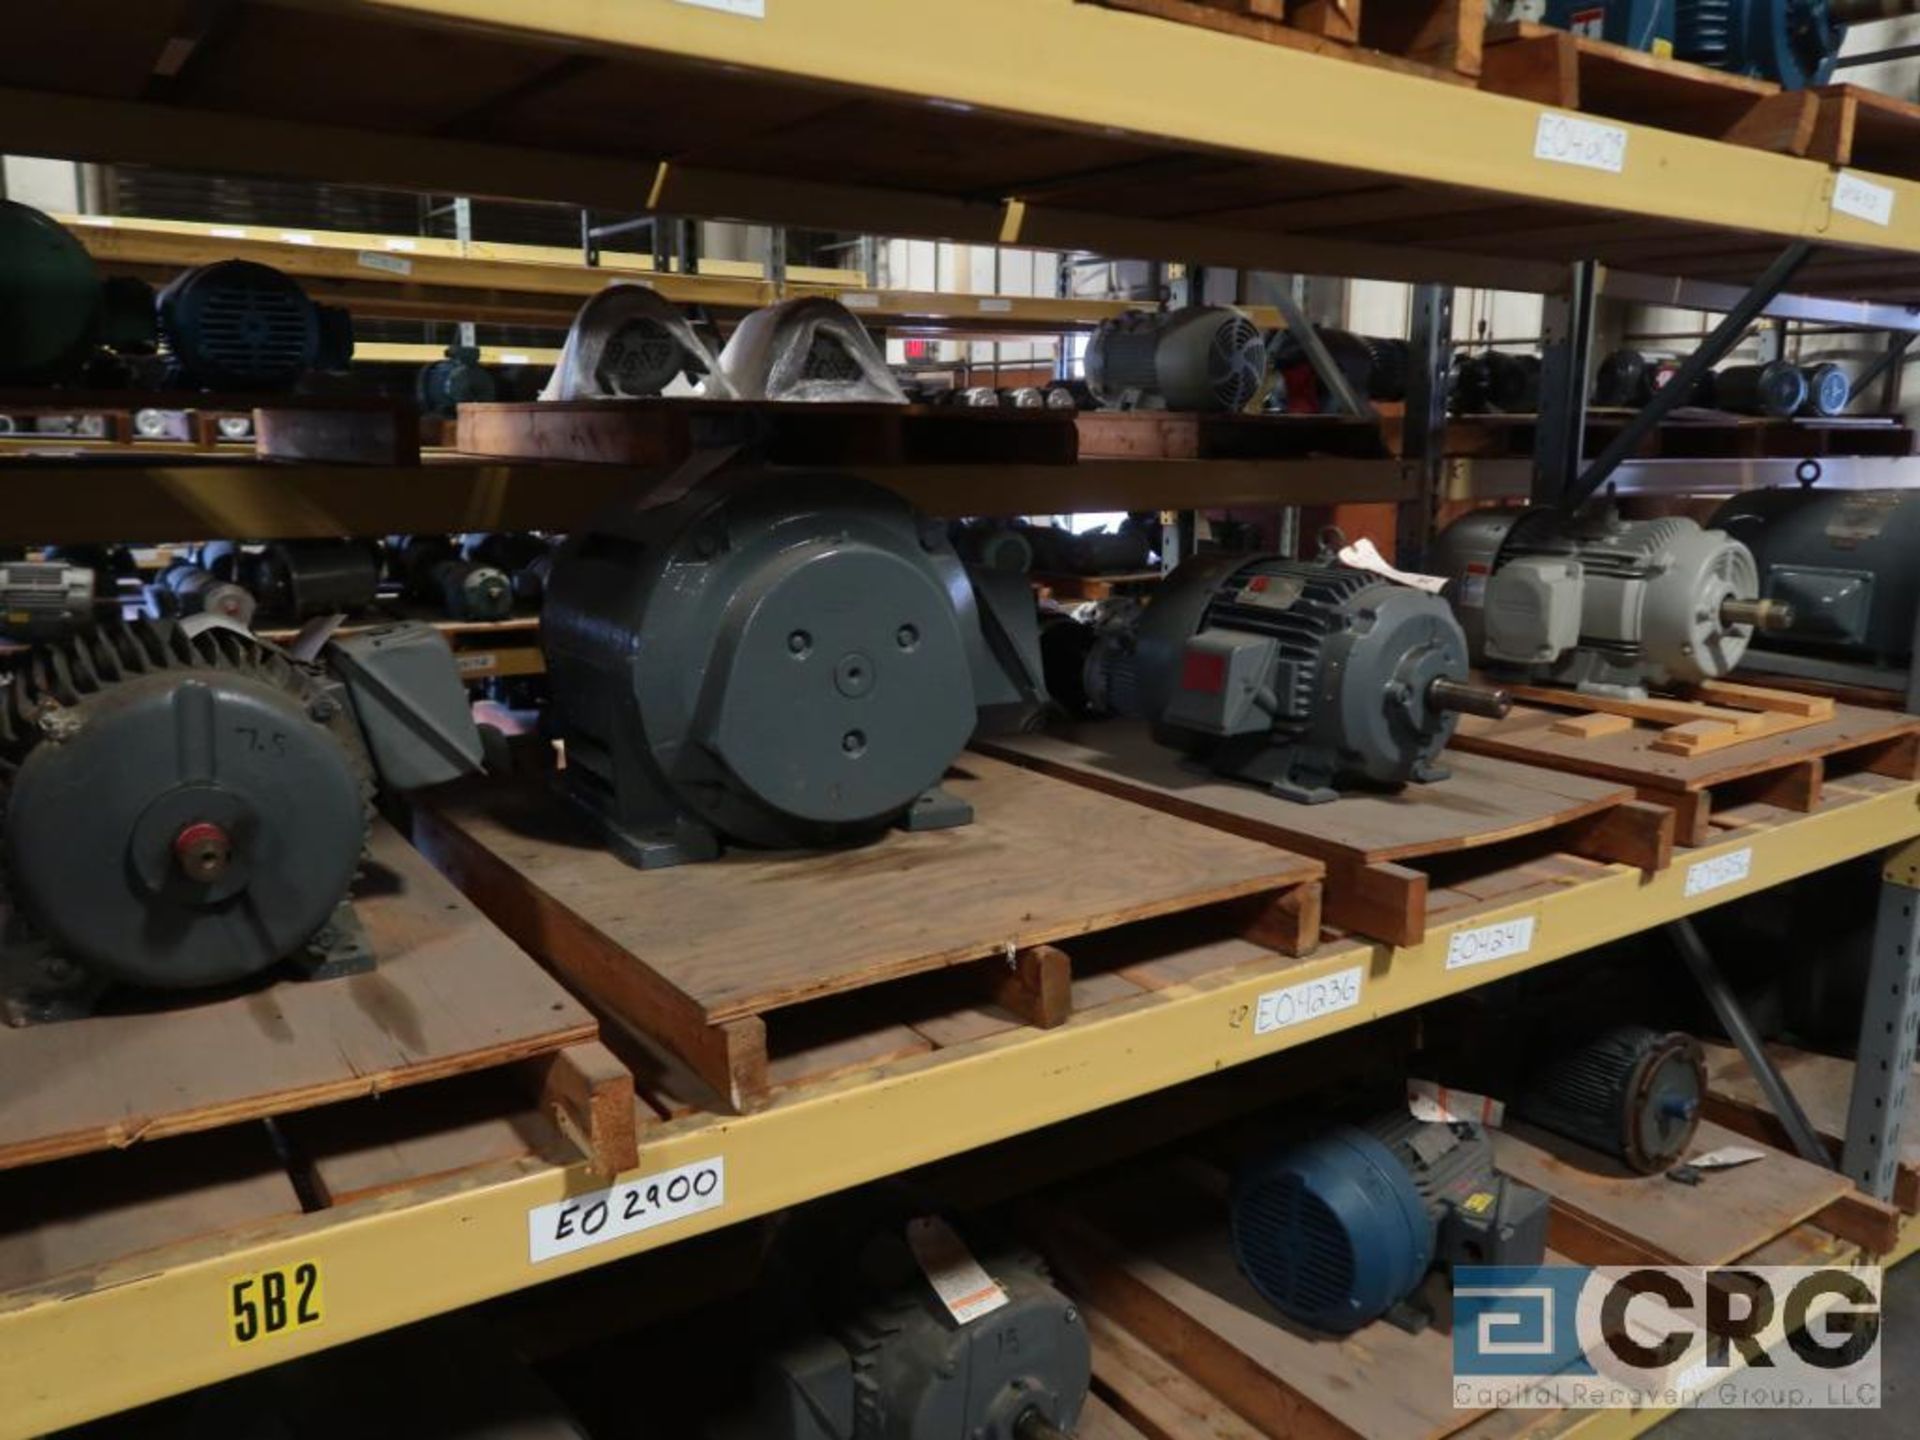 Lot of (32) assorted 15 HP, 10 HP, and 7.5 HP motors on (7) shelves, some with gear drives (Motor - Image 4 of 8